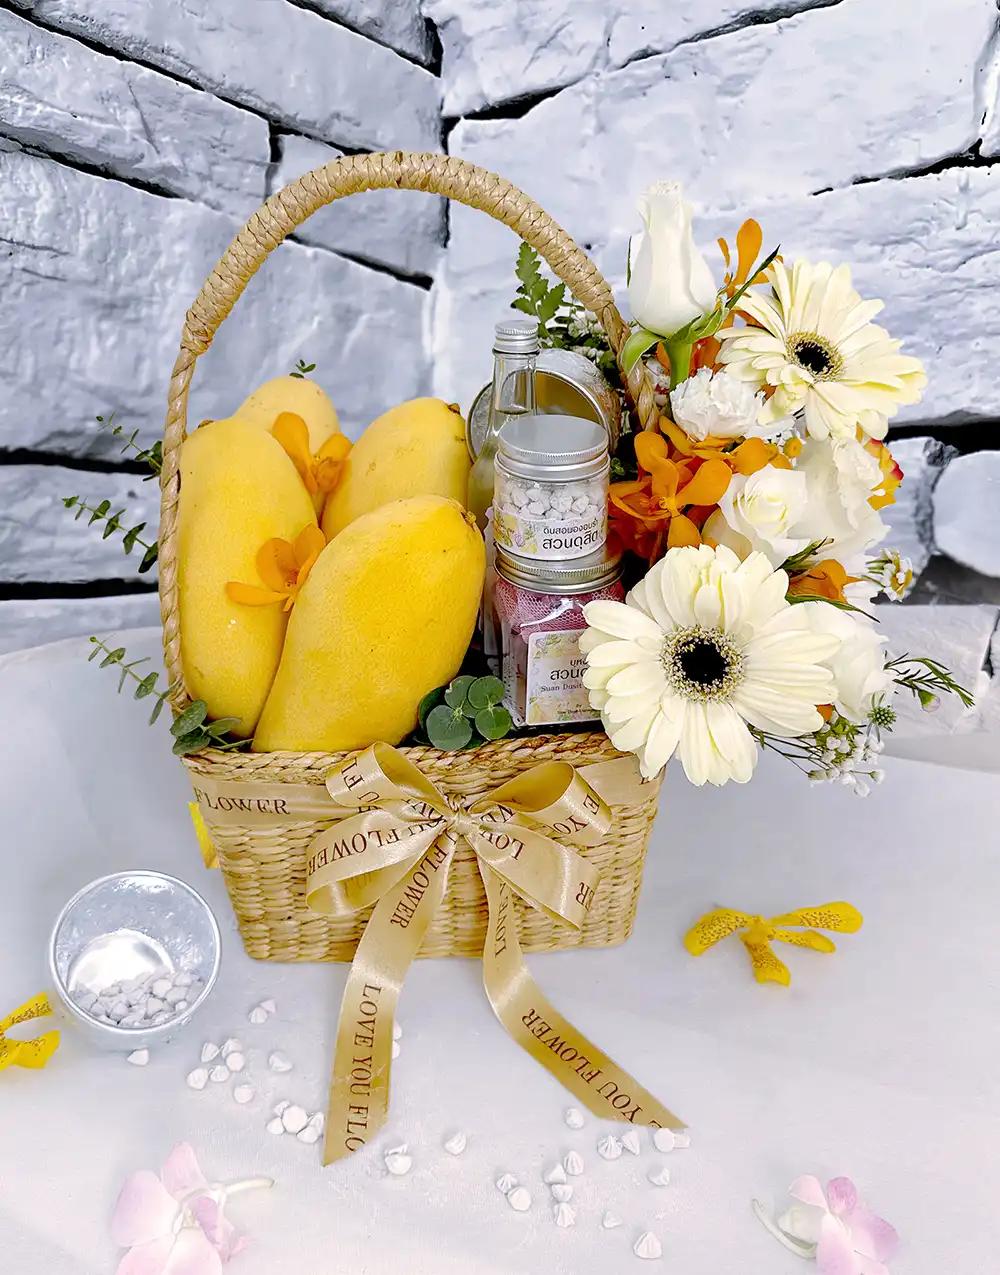 "Songkran gift basket BFS006 with ripe mangoes and Thai scented water set, adorned with cream-white flowers.